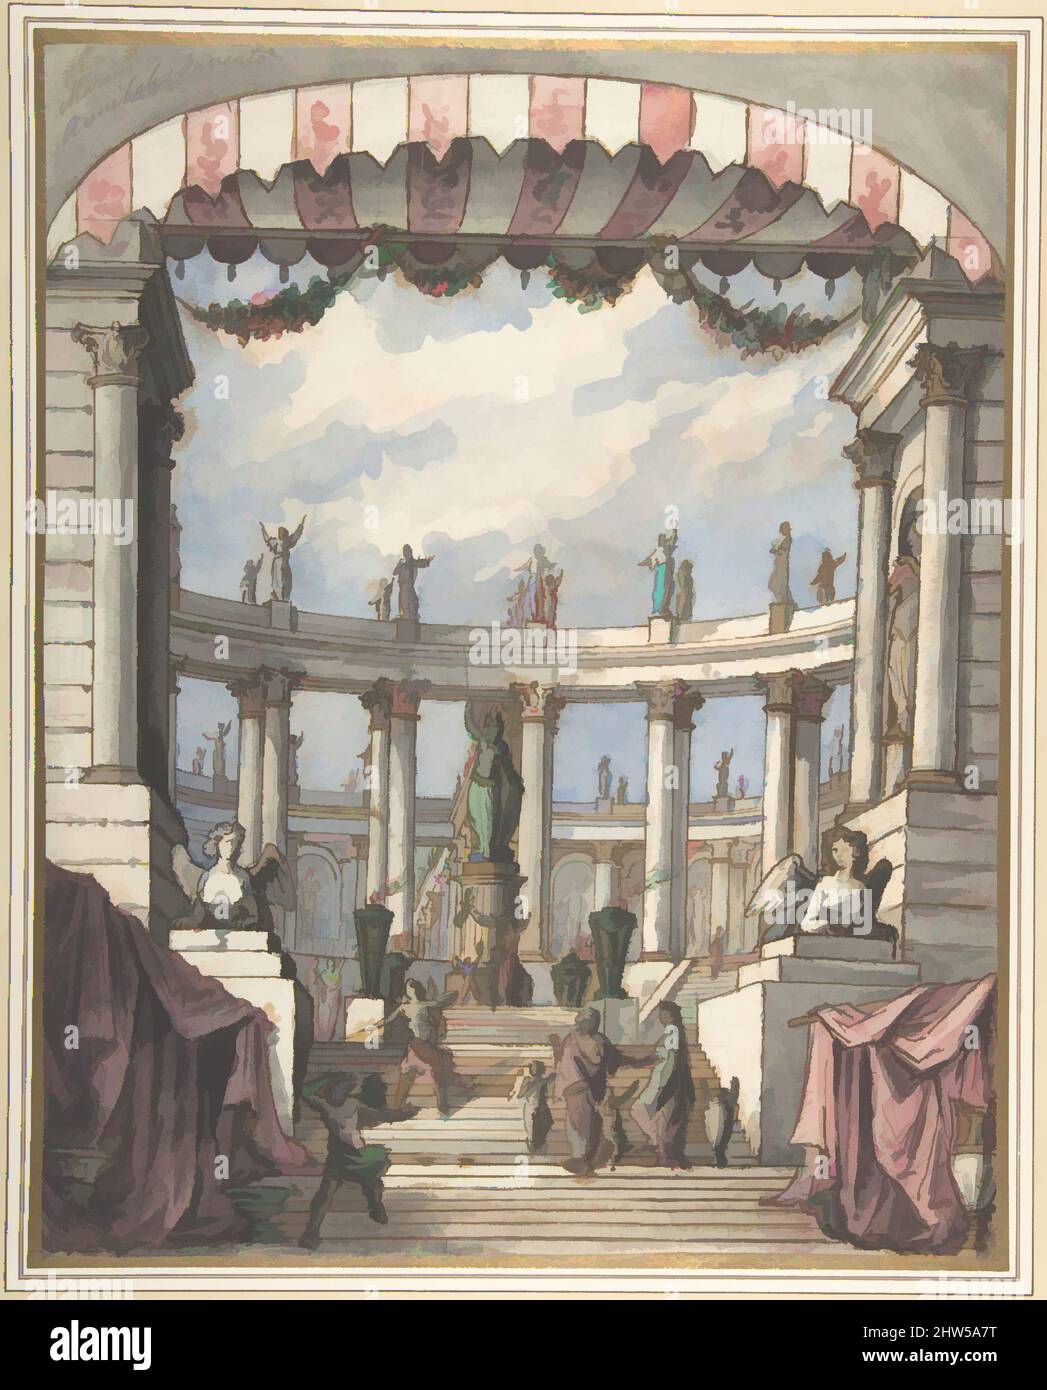 Art inspired by Design for a Stage Set: A Classical Courtyard and Colonnade with a Statue of Minerva, 1780–90, Pen and brown ink, brush with gray, blue, green and pink watercolor, over graphite or lead, on cream laid paper, 17-3/8 x 12-3/8 in. (44.2 x 31.5 cm), Drawings, Leonardo, Classic works modernized by Artotop with a splash of modernity. Shapes, color and value, eye-catching visual impact on art. Emotions through freedom of artworks in a contemporary way. A timeless message pursuing a wildly creative new direction. Artists turning to the digital medium and creating the Artotop NFT Stock Photo